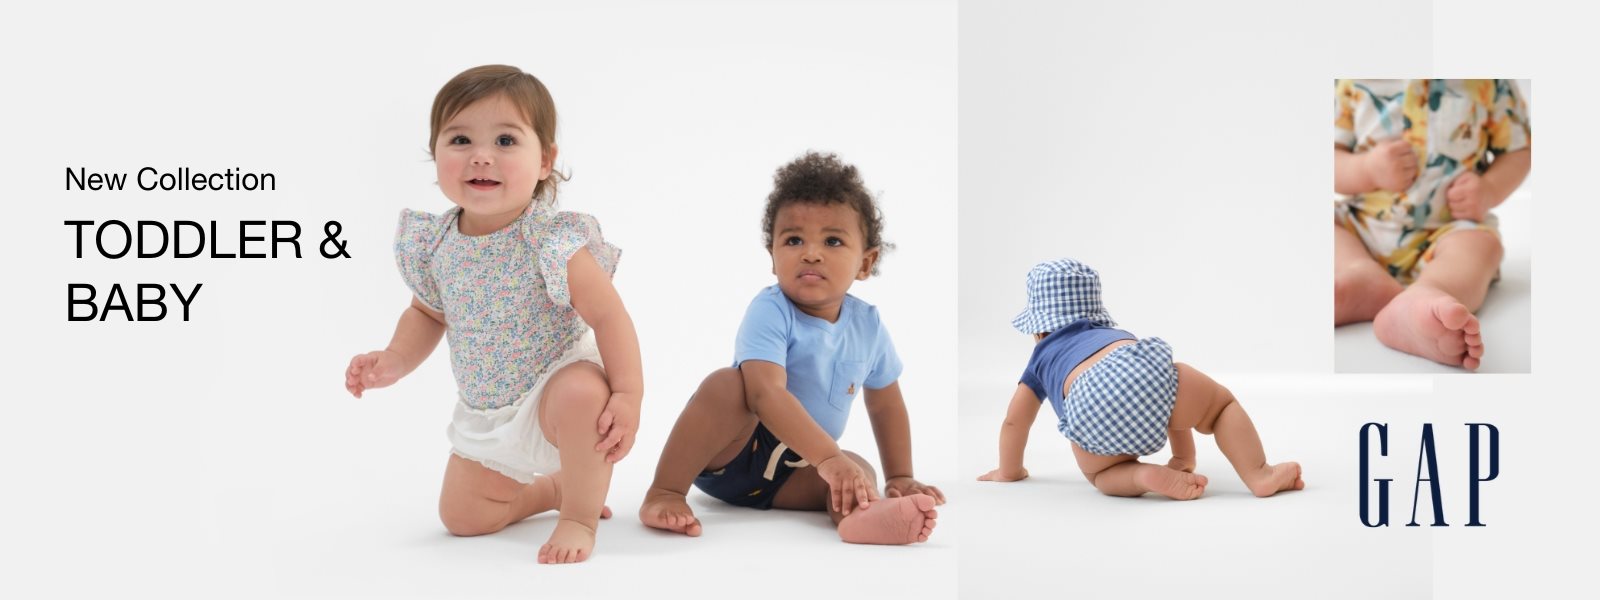 TODDLER & BABY NEW IN